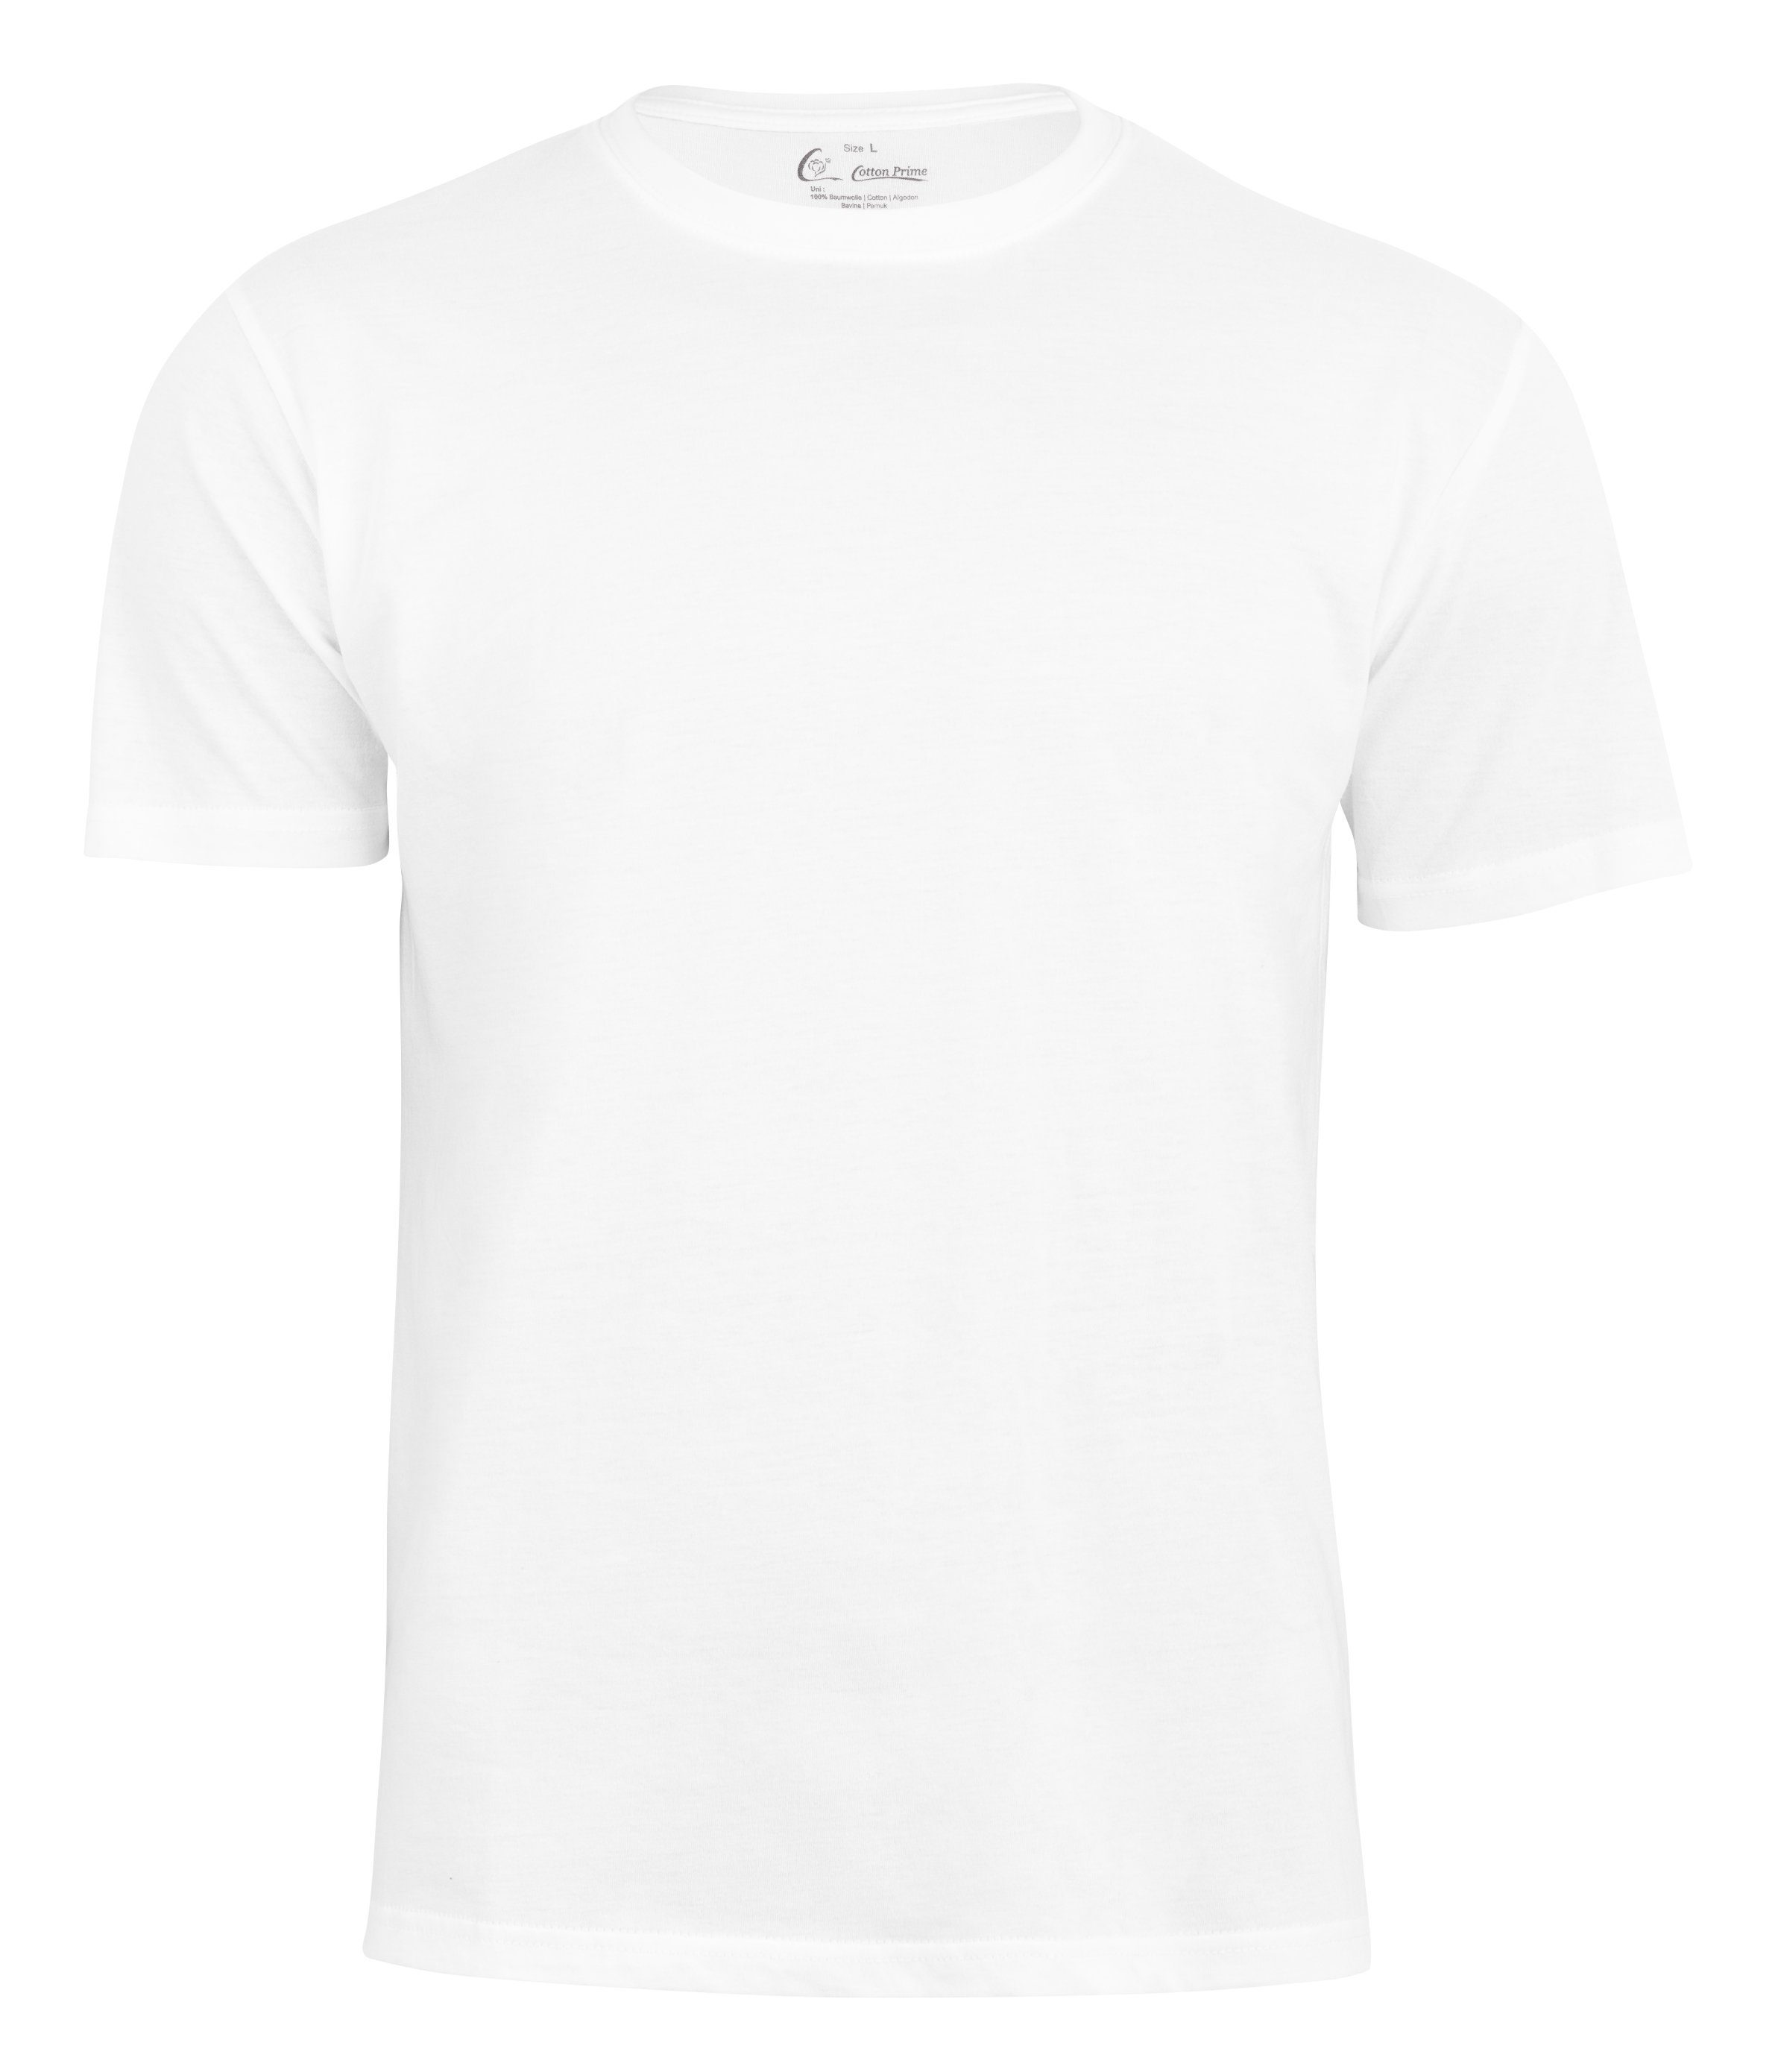 Tee - Prime® O-Neck T-Shirt Weiss Cotton